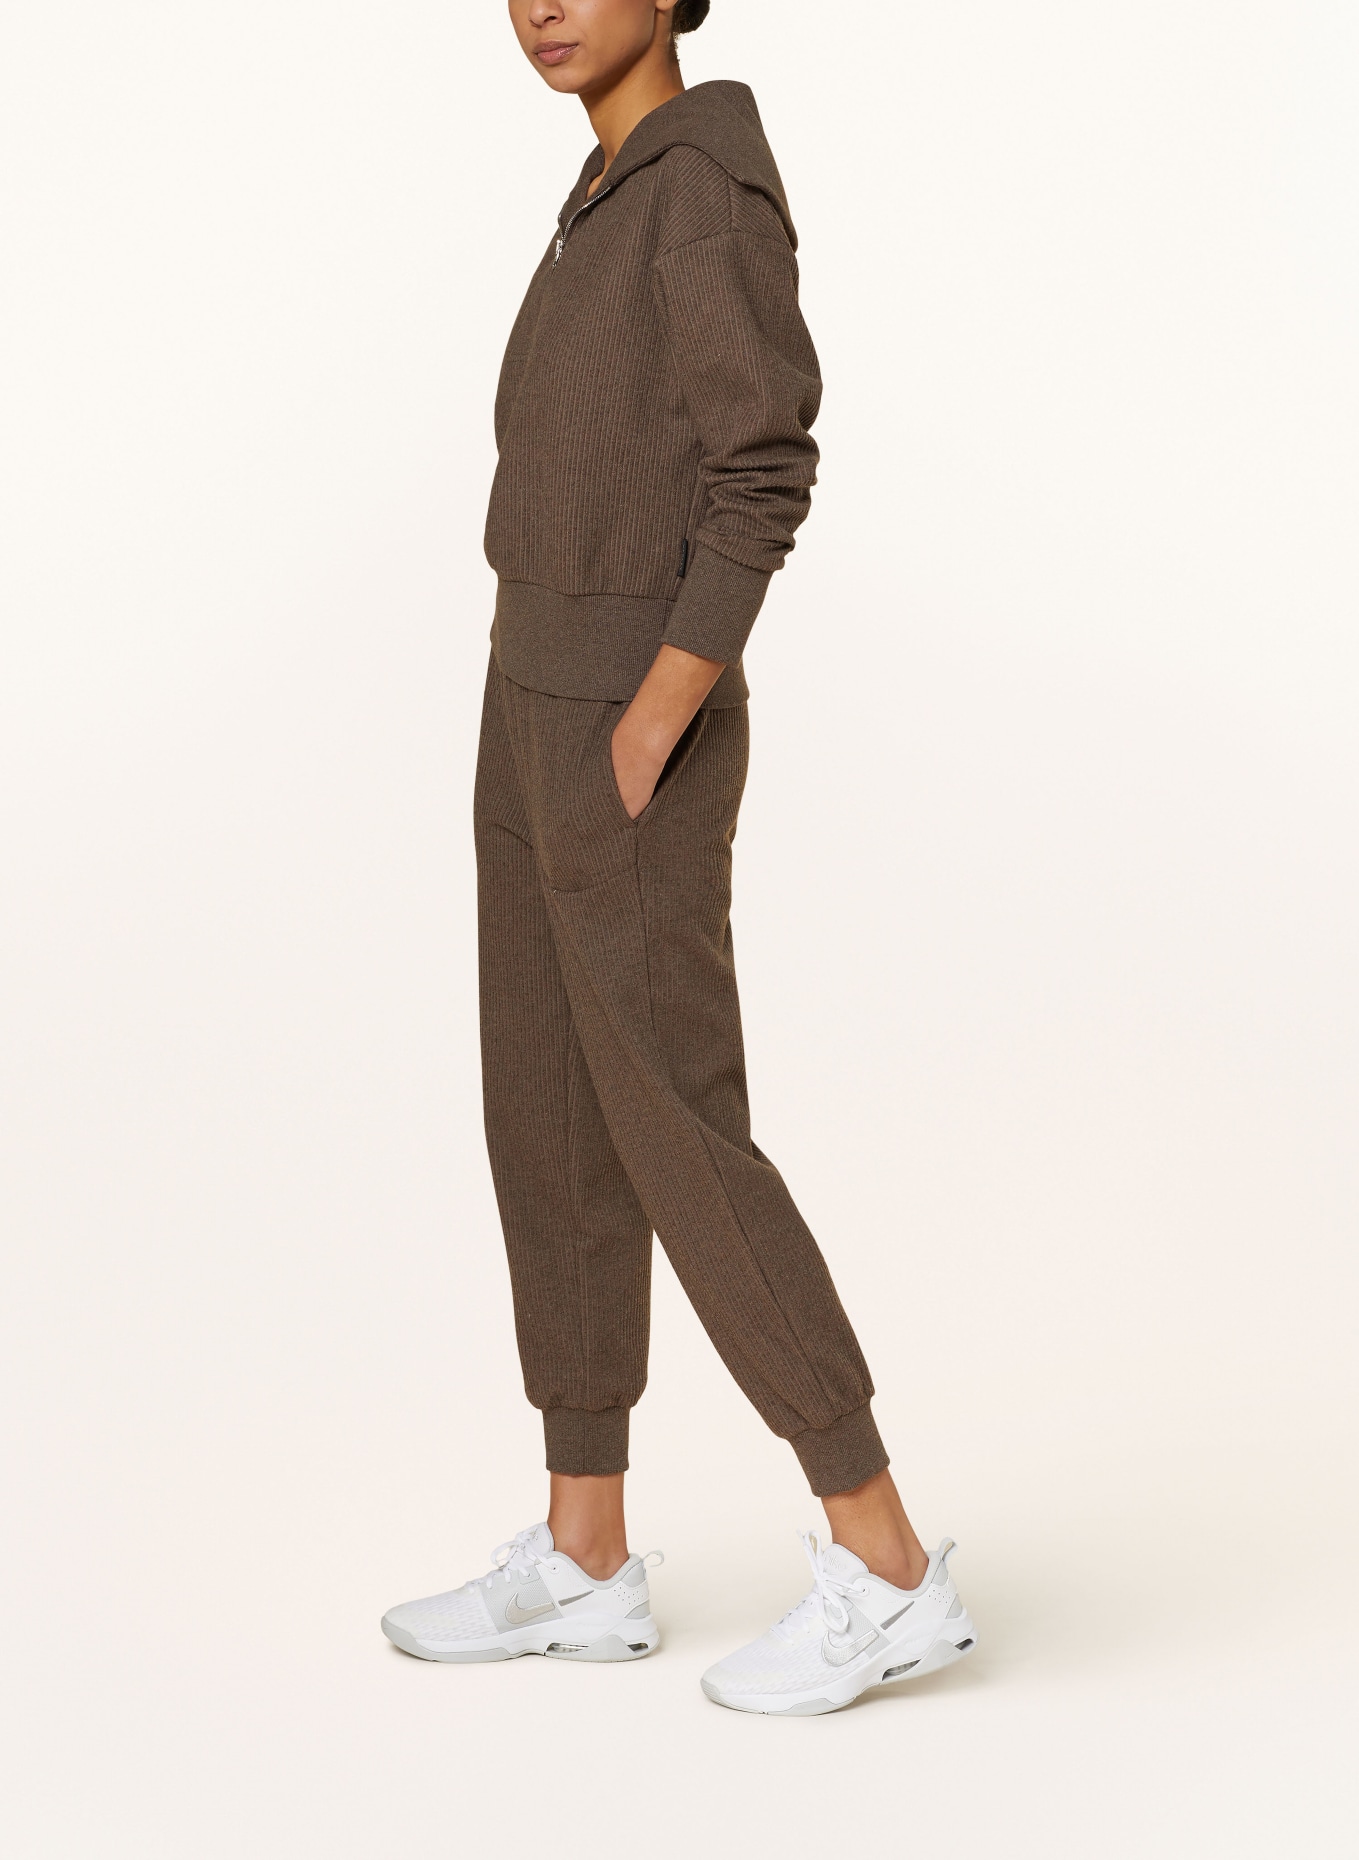 VARLEY Pants RUSSELL in jogger style, Color: BROWN (Image 4)